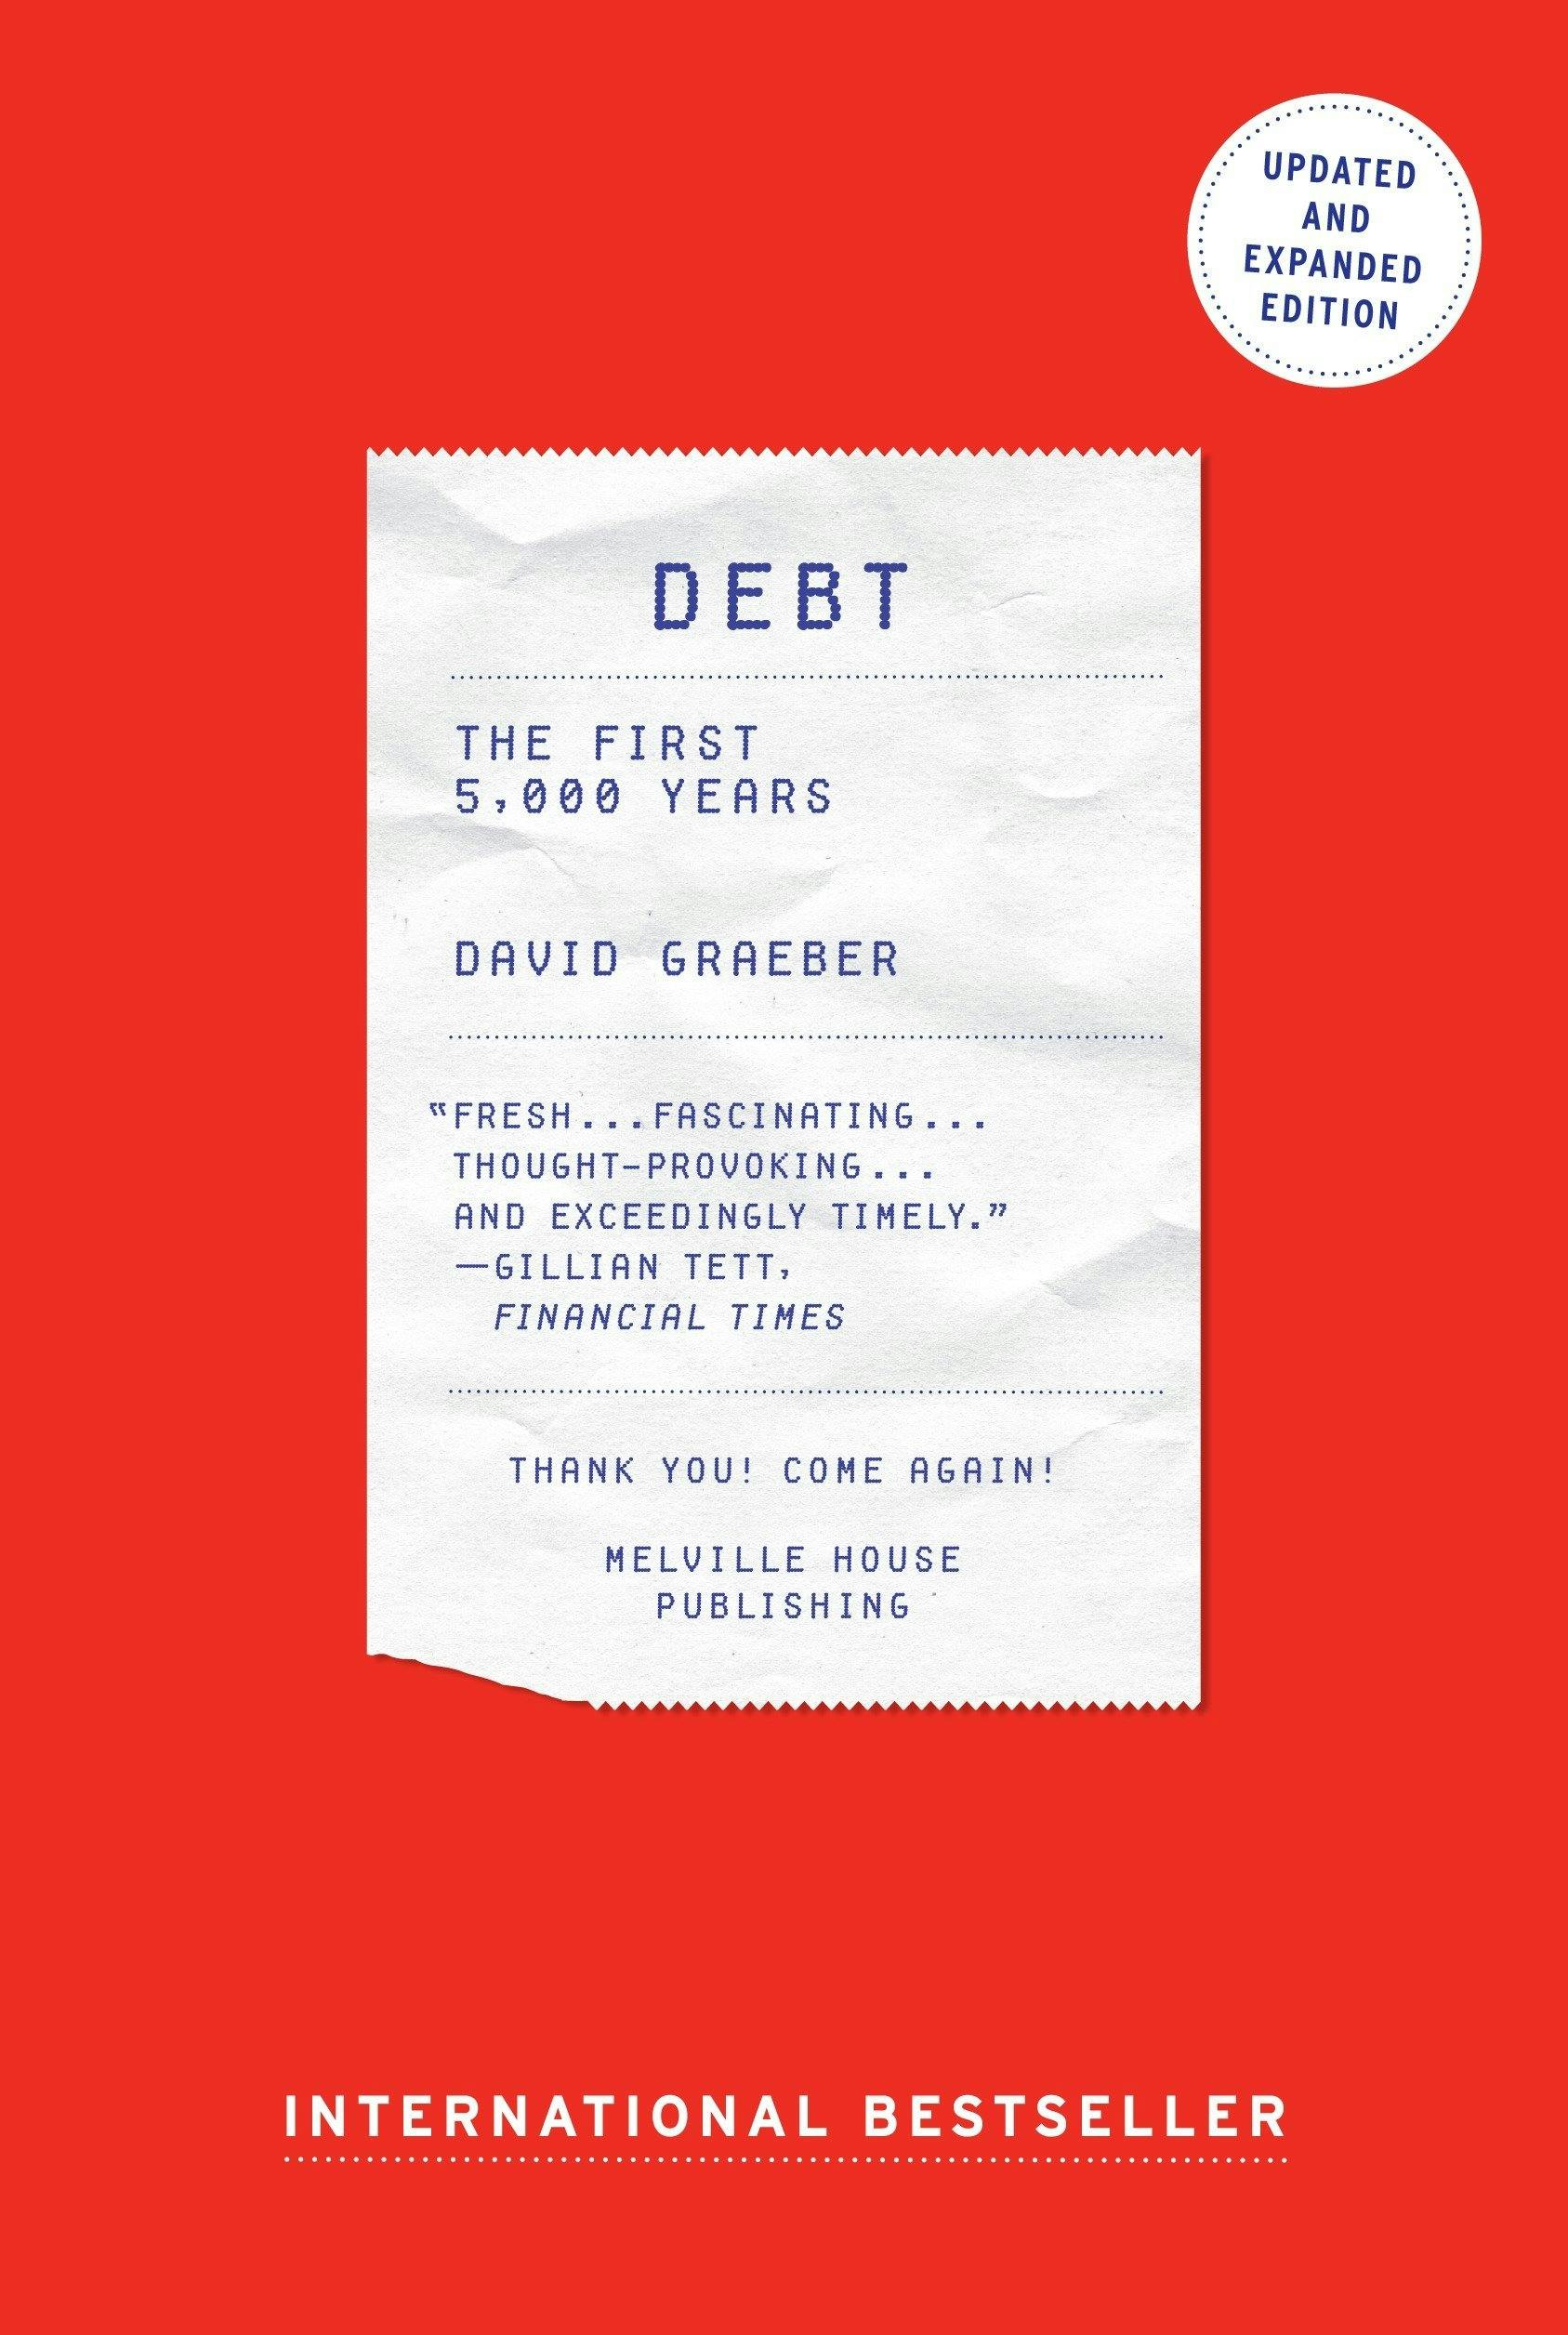 The media cover for “Debt: The First 5,000 Years” by David Graeber